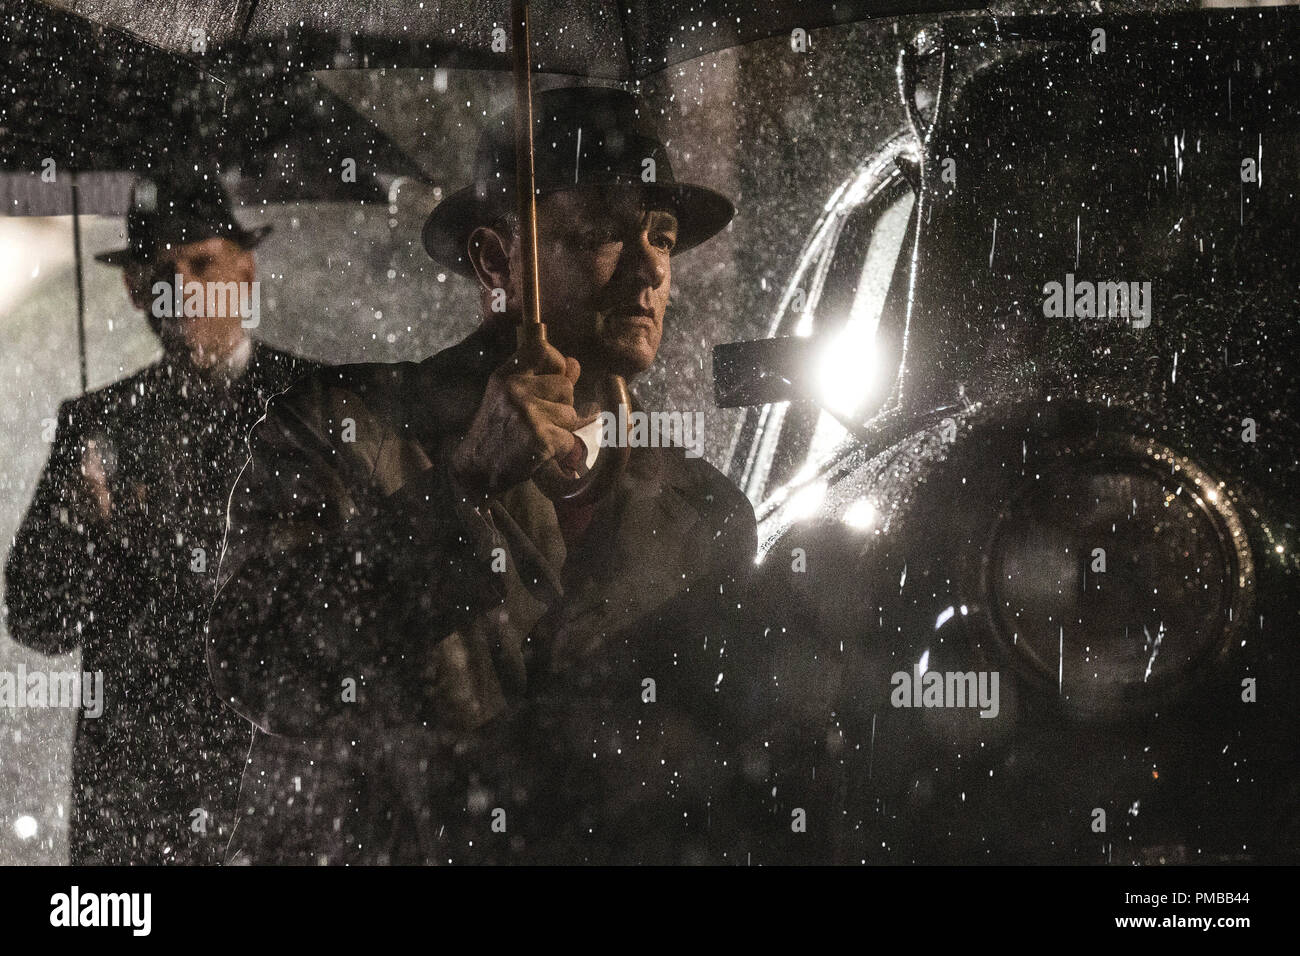 Tom Hanks stars as James Donovan in the incredible story of an ordinary man placed in extraordinary circumstances in DreamWorks Pictures/Fox 2000 Pictures' dramatic thriller BRIDGE OF SPIES, directed by Steven Spielberg. Stock Photo